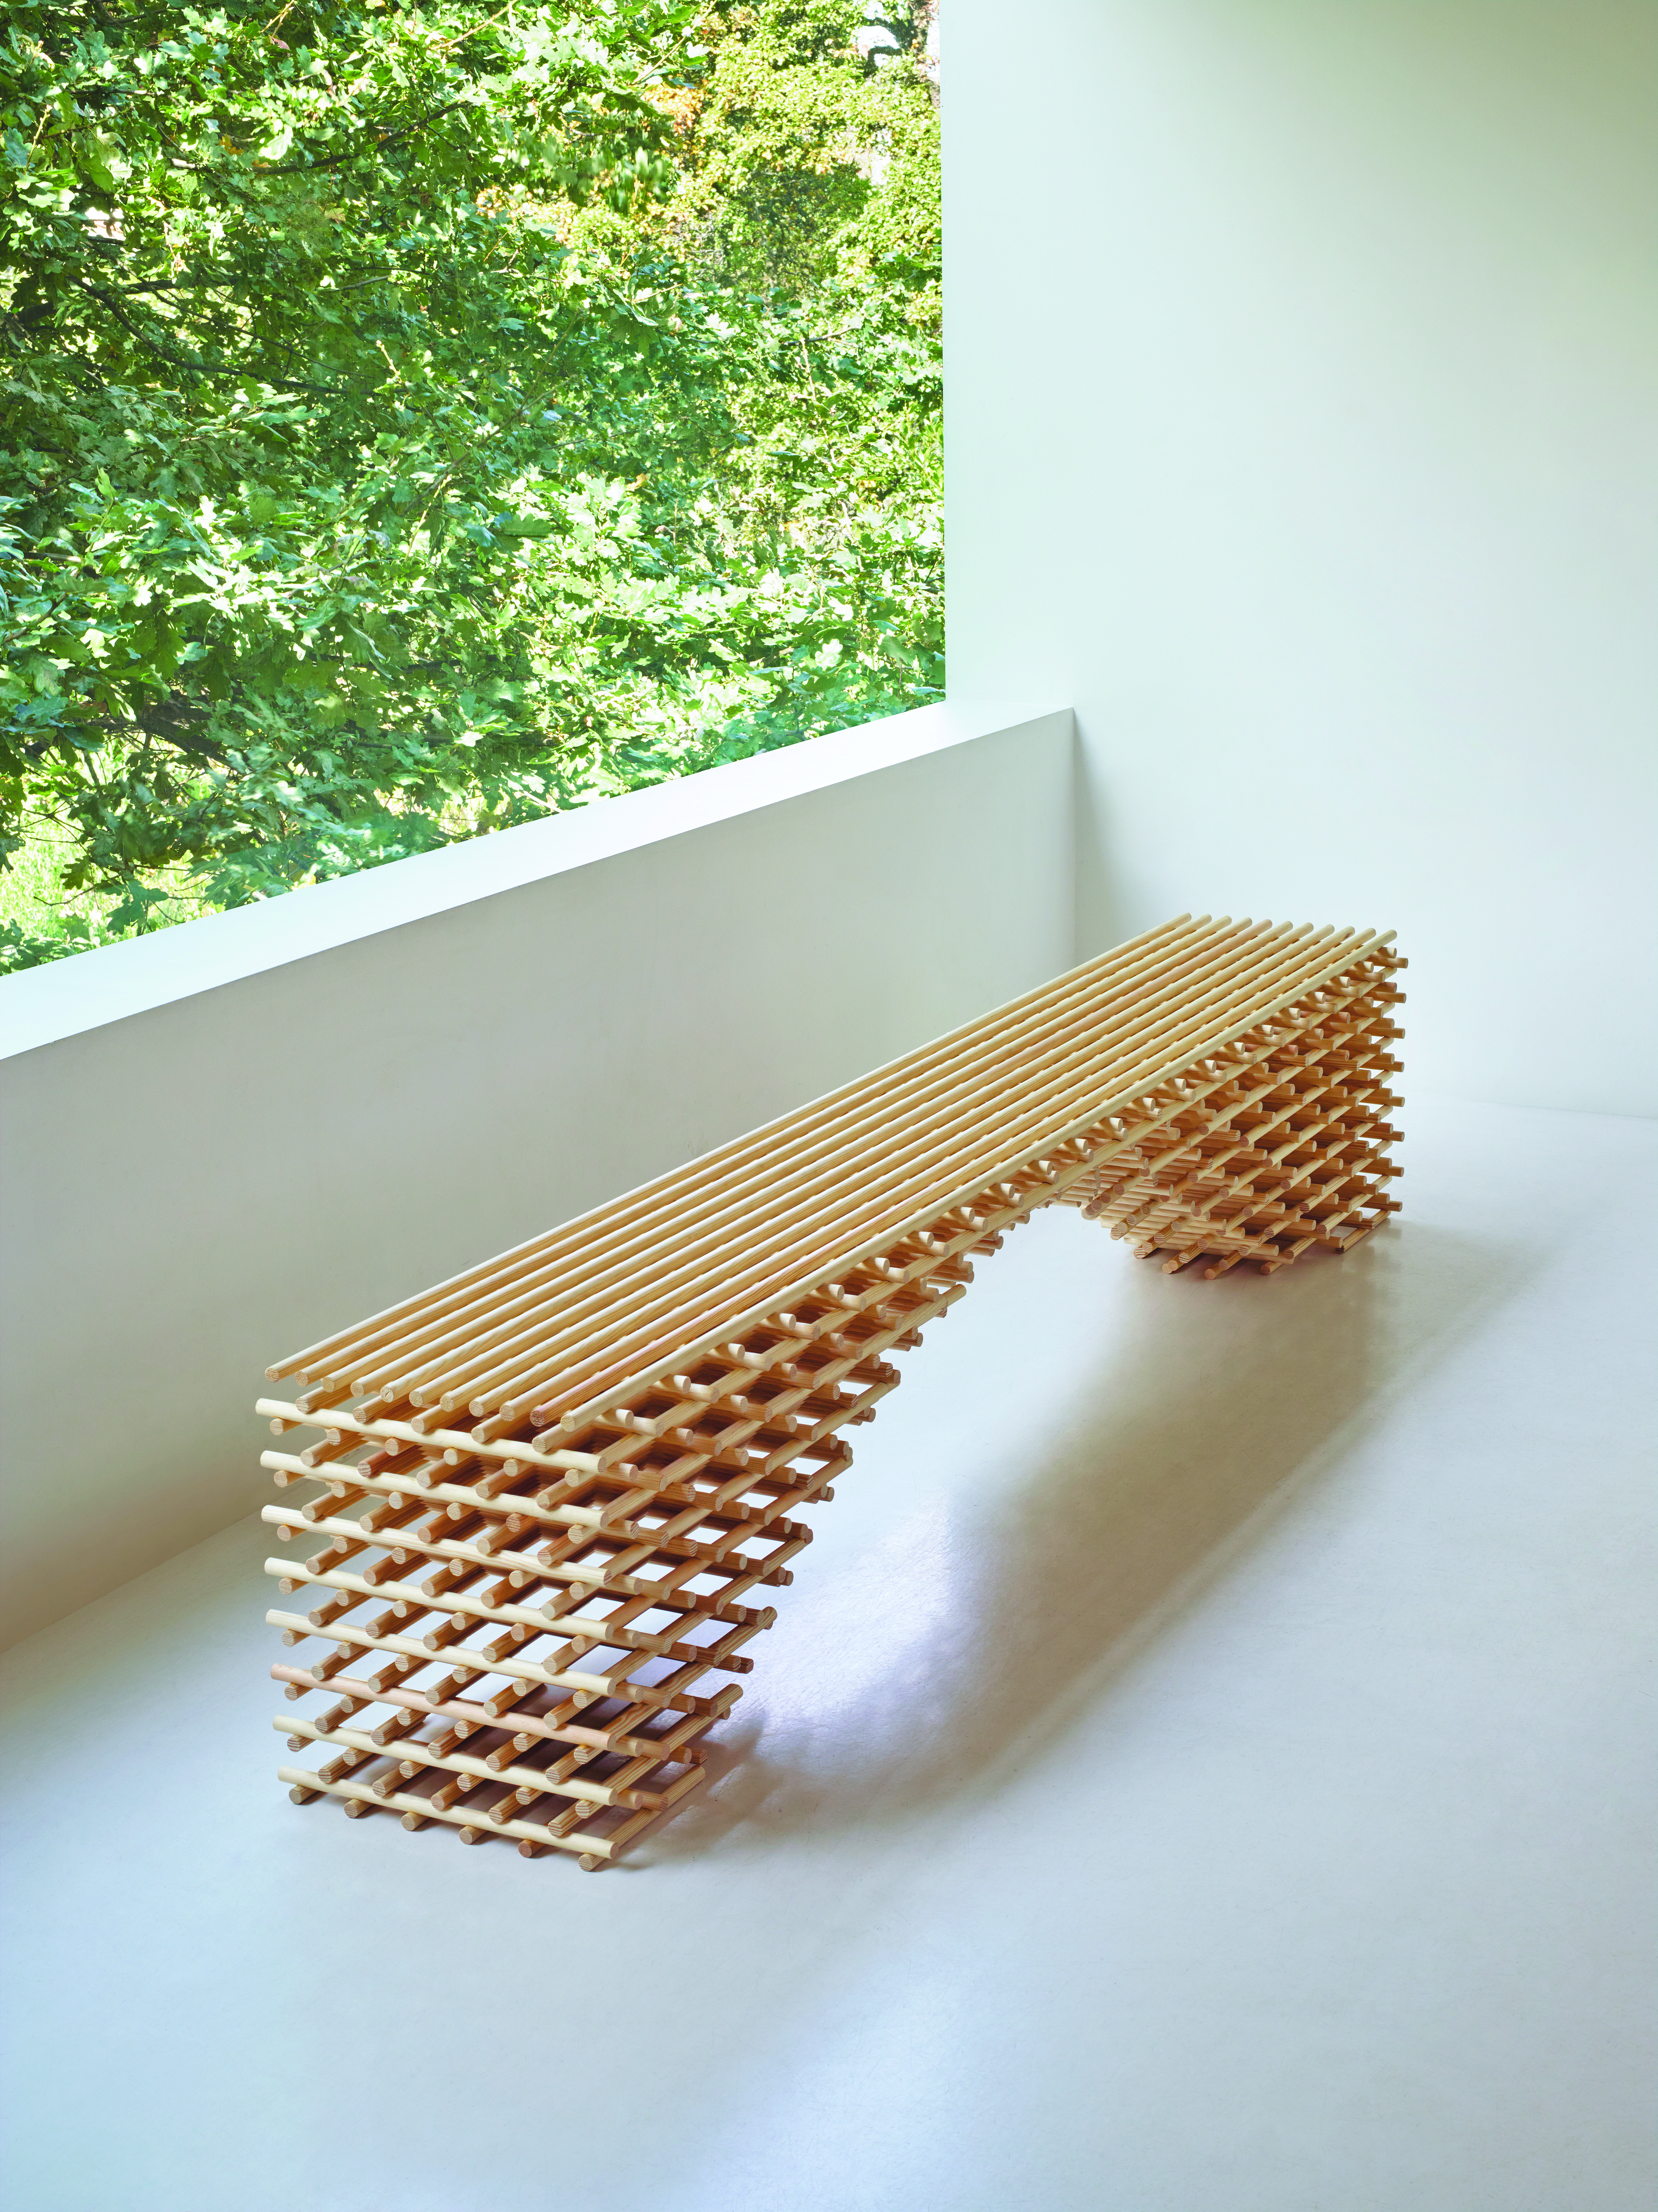 Commissioned by design research gallery Matter of Stuff, the Latitude bench spans 2.2 meters and is made of 422 salvaged wooden dowels. Photo by Angela Moore